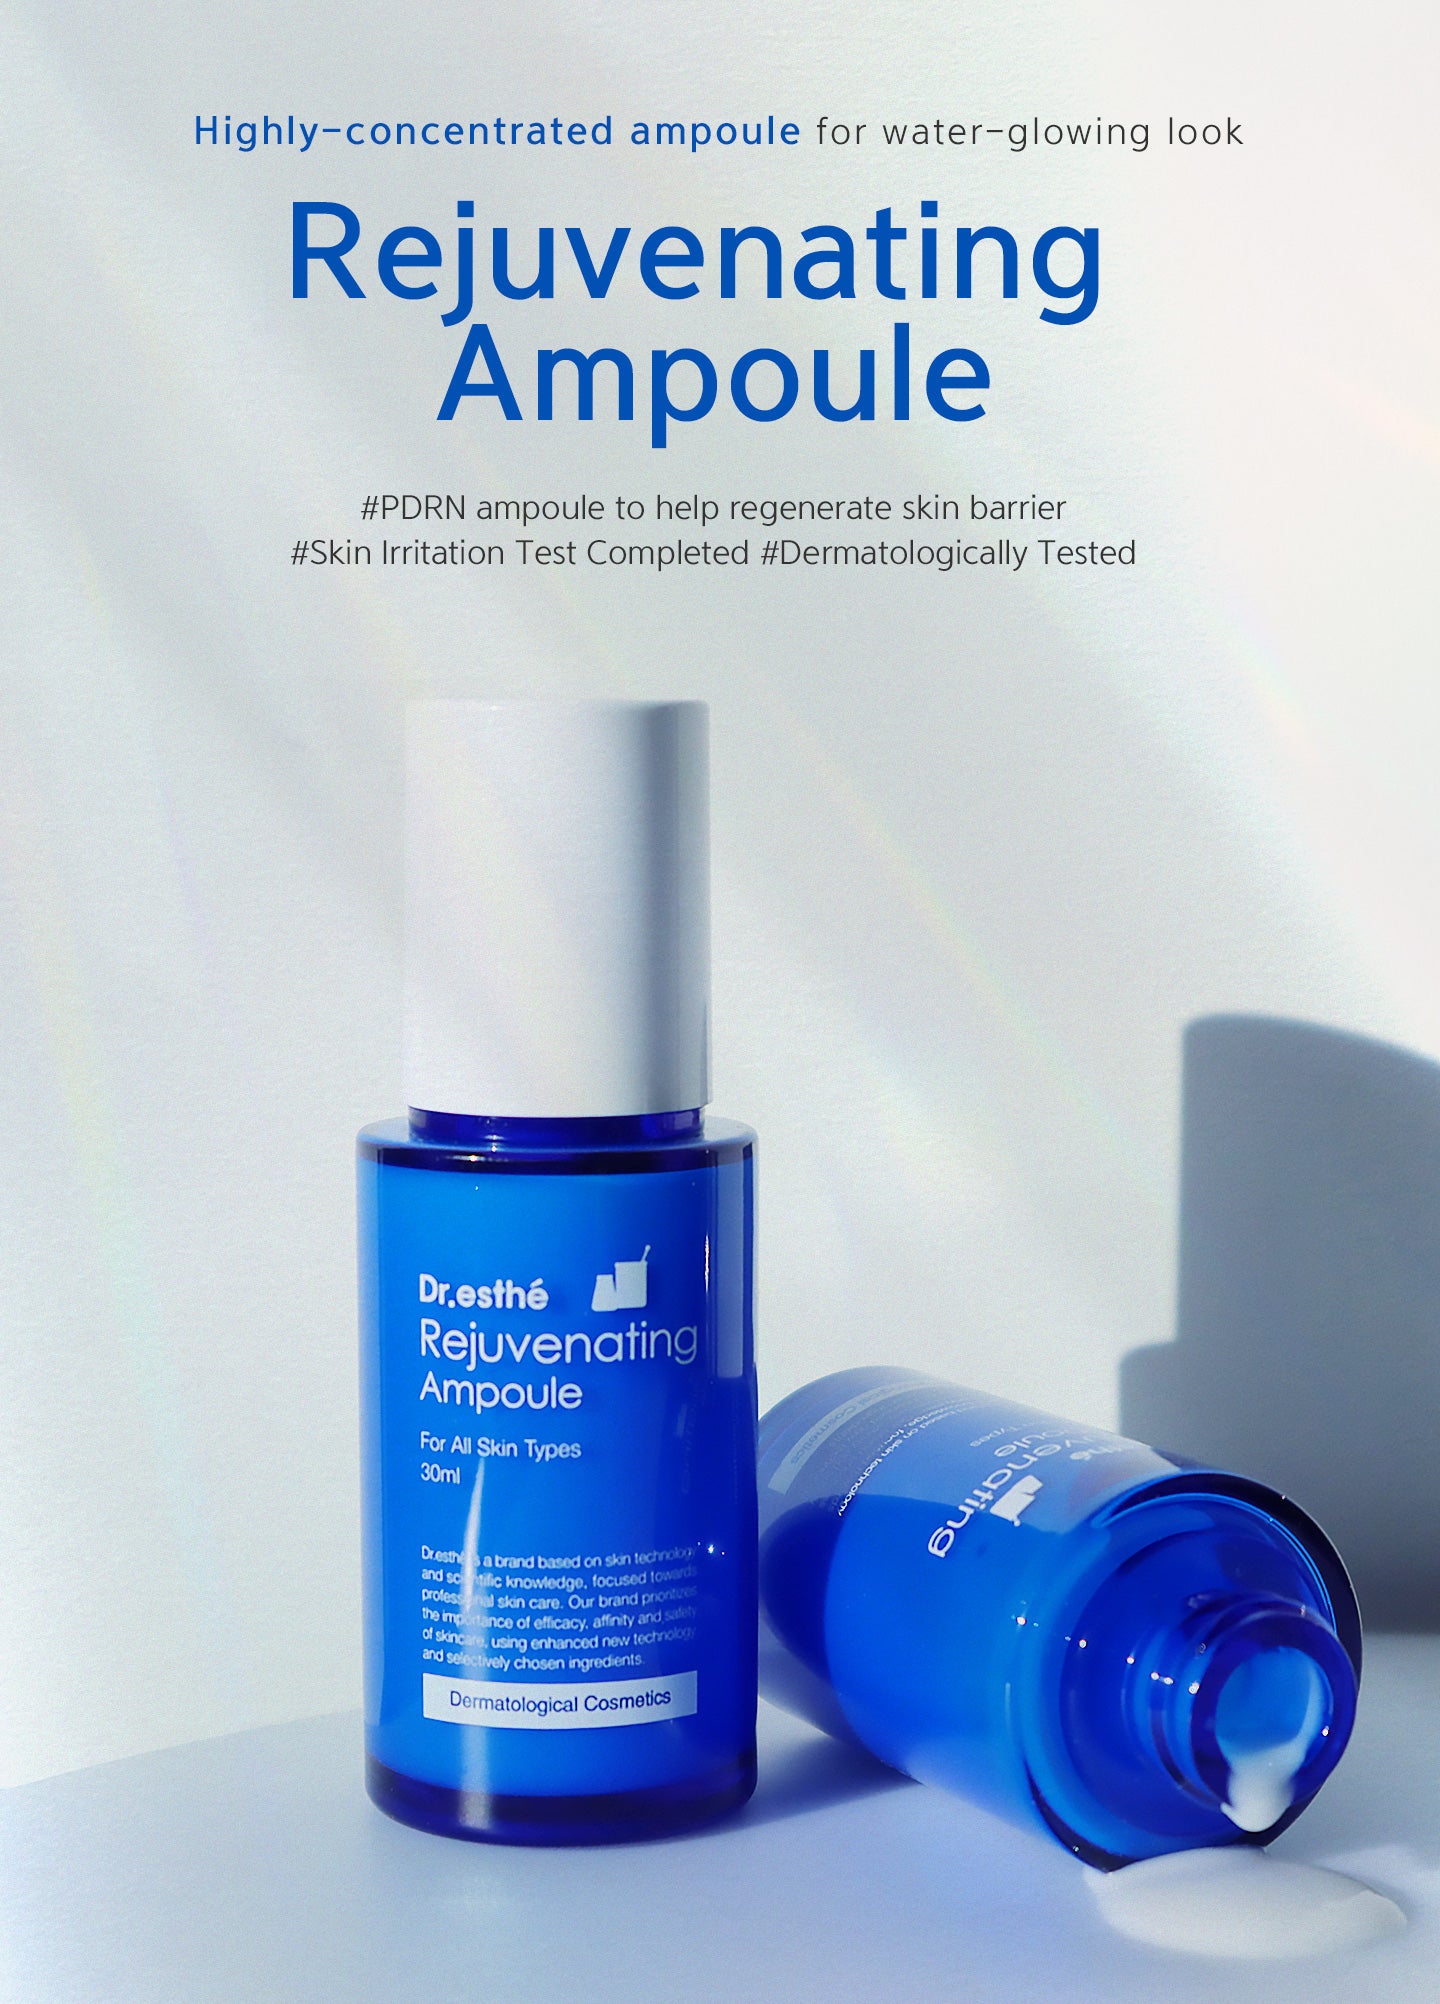 Rejuvenating ampoule. Highly-concentrated ampoule for water-glowing look. #pdrn ampoule to help regenerate skin barrier #skin irritation test completed #dermatologically tested.